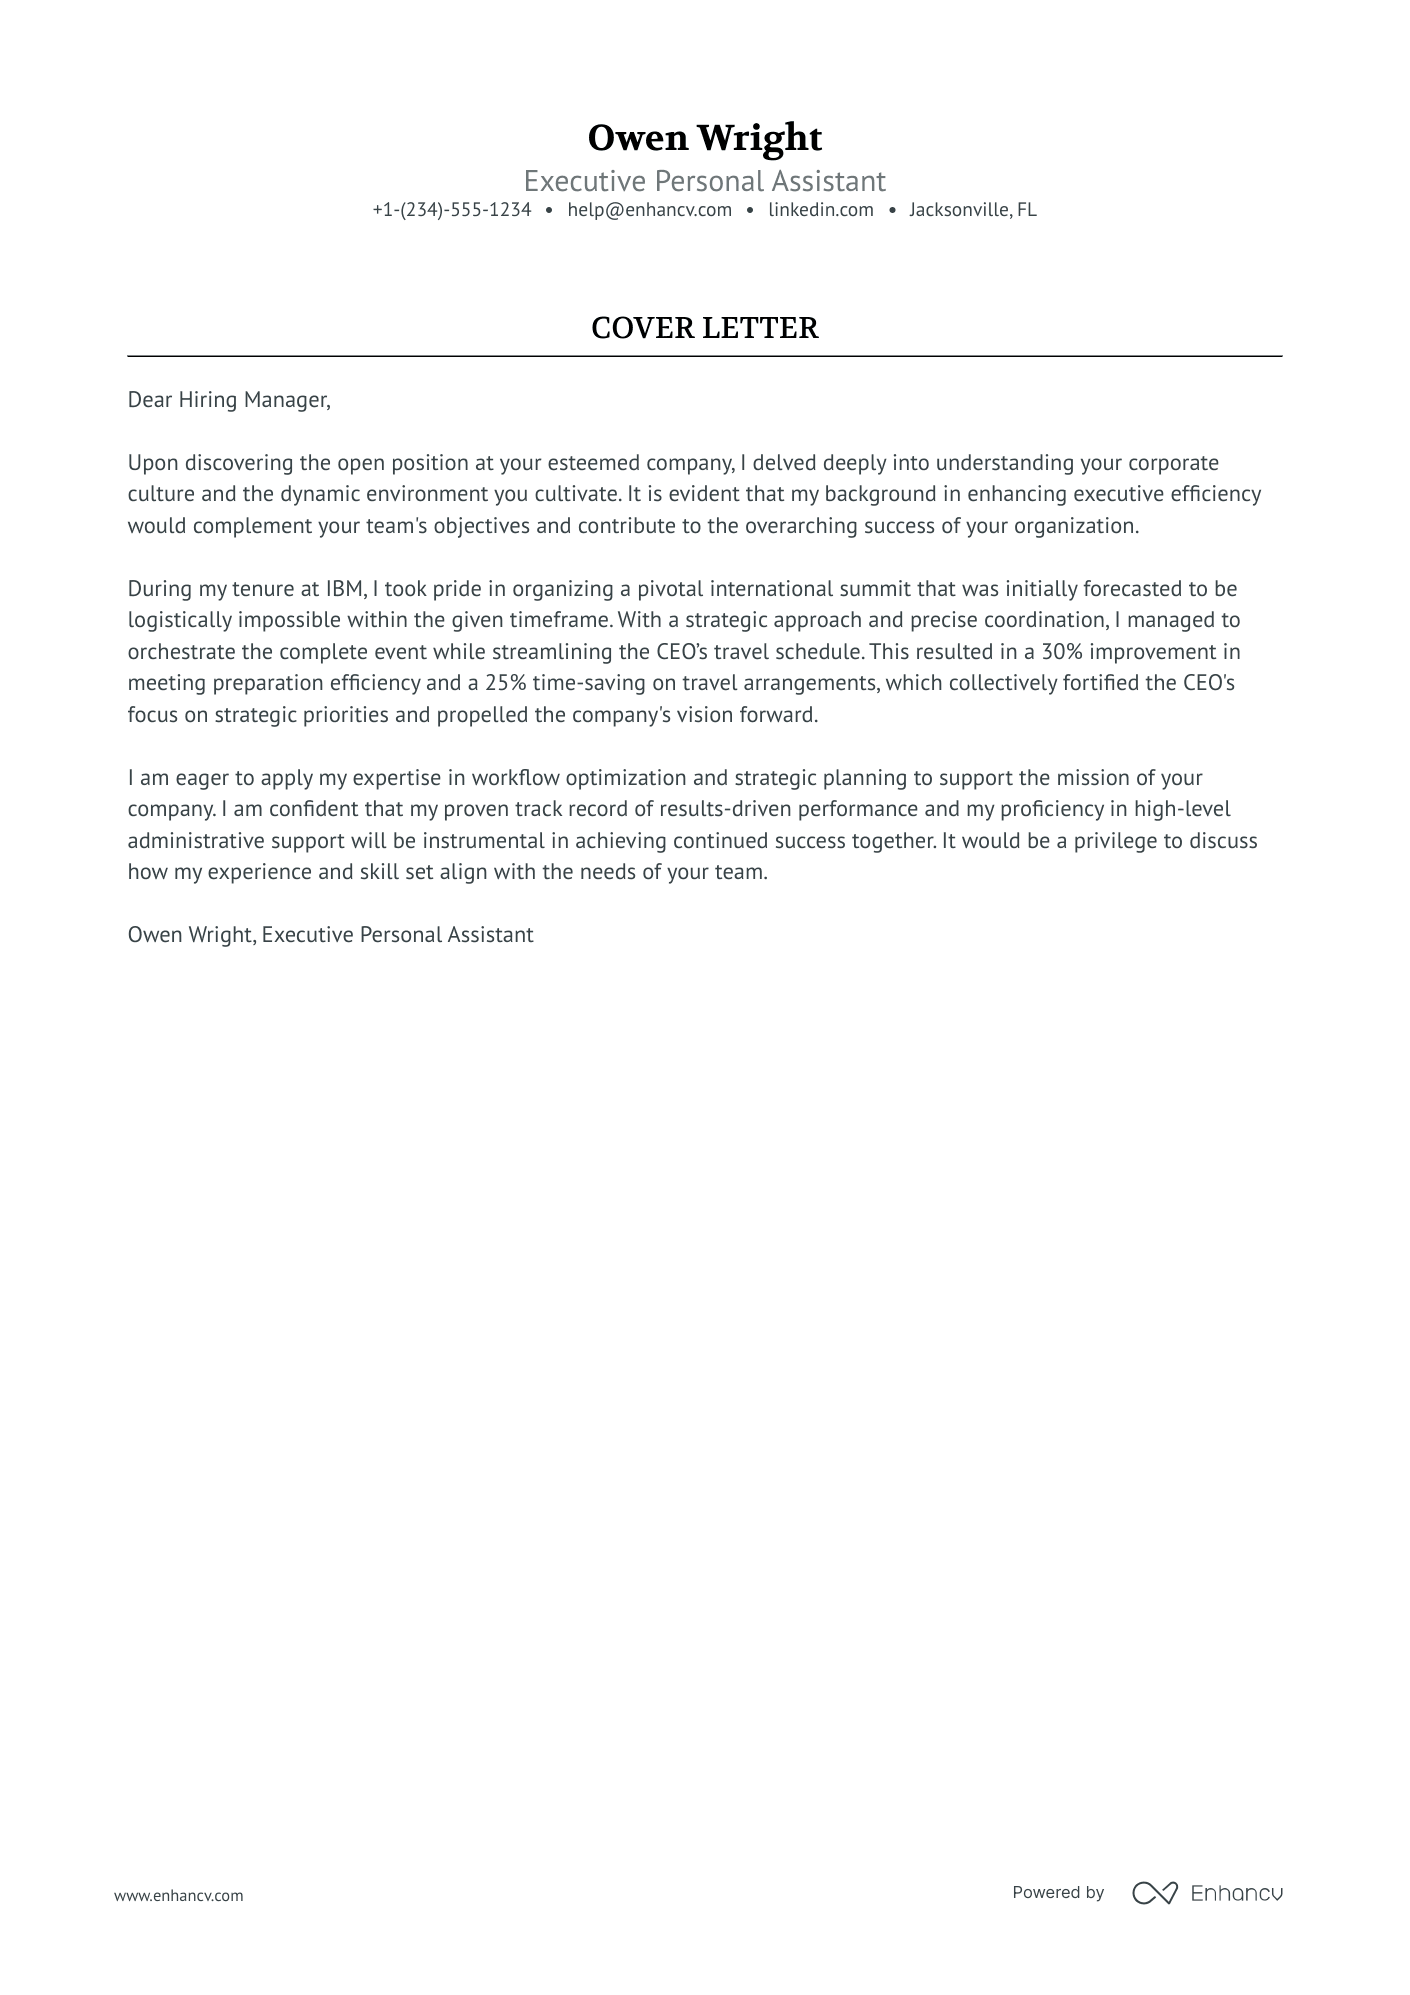 sample cover letter for personal assistant